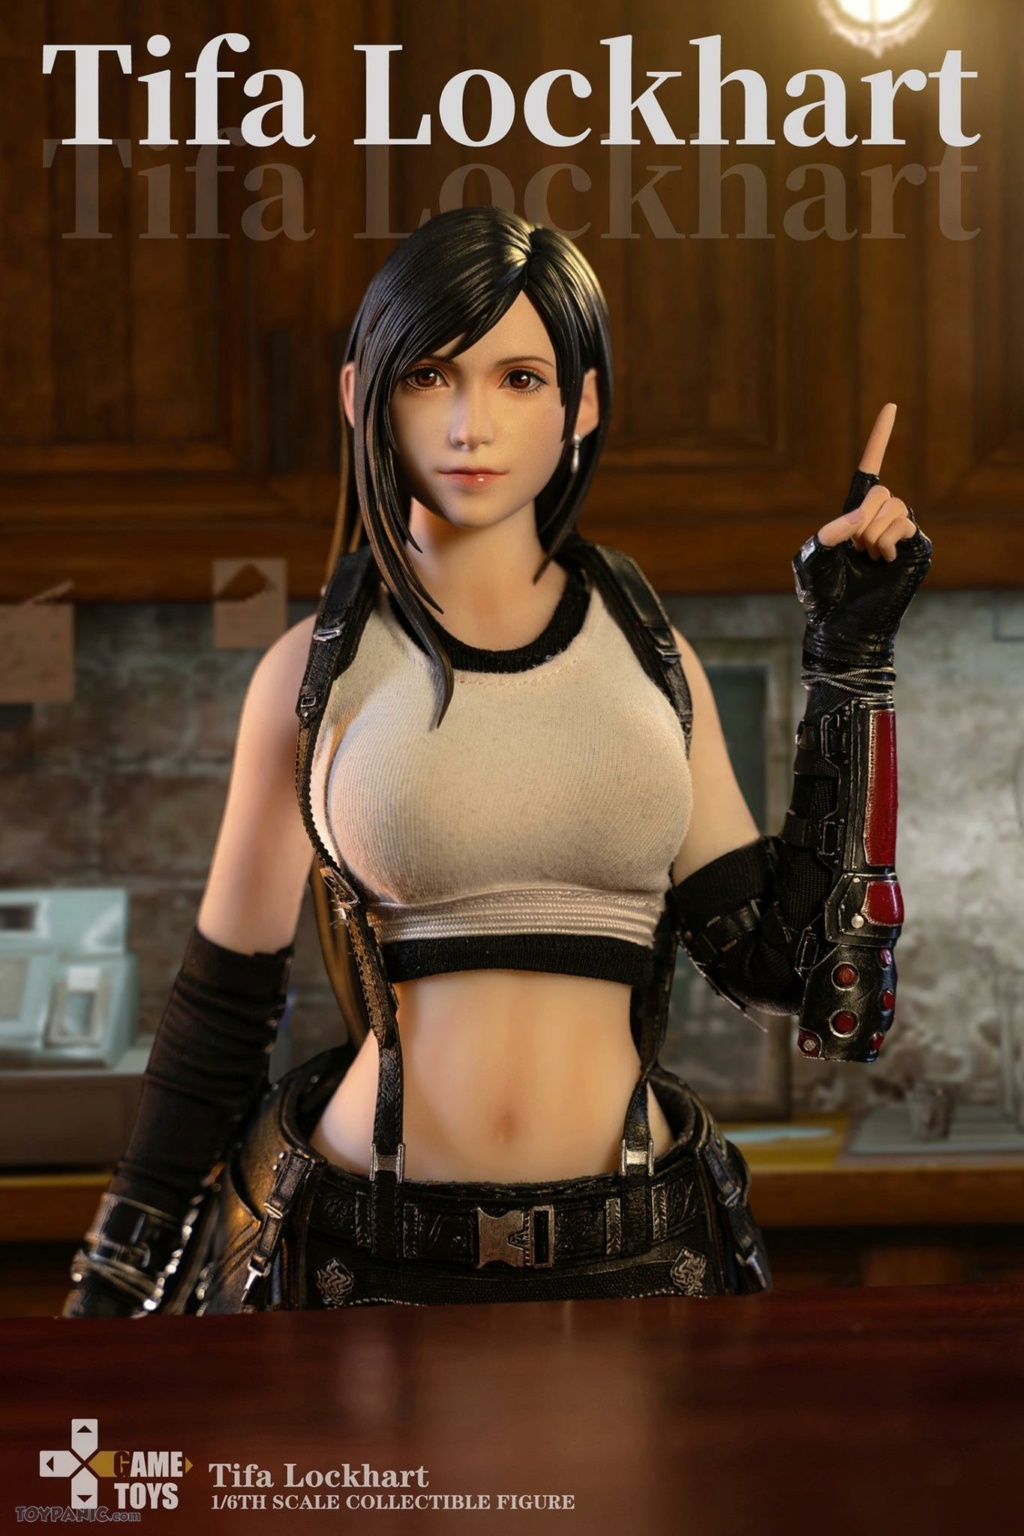 newproduct - NEW PRODUCT: Gametoys: 1/6 Fighting Goddess Tifa Code: GT-009 1053